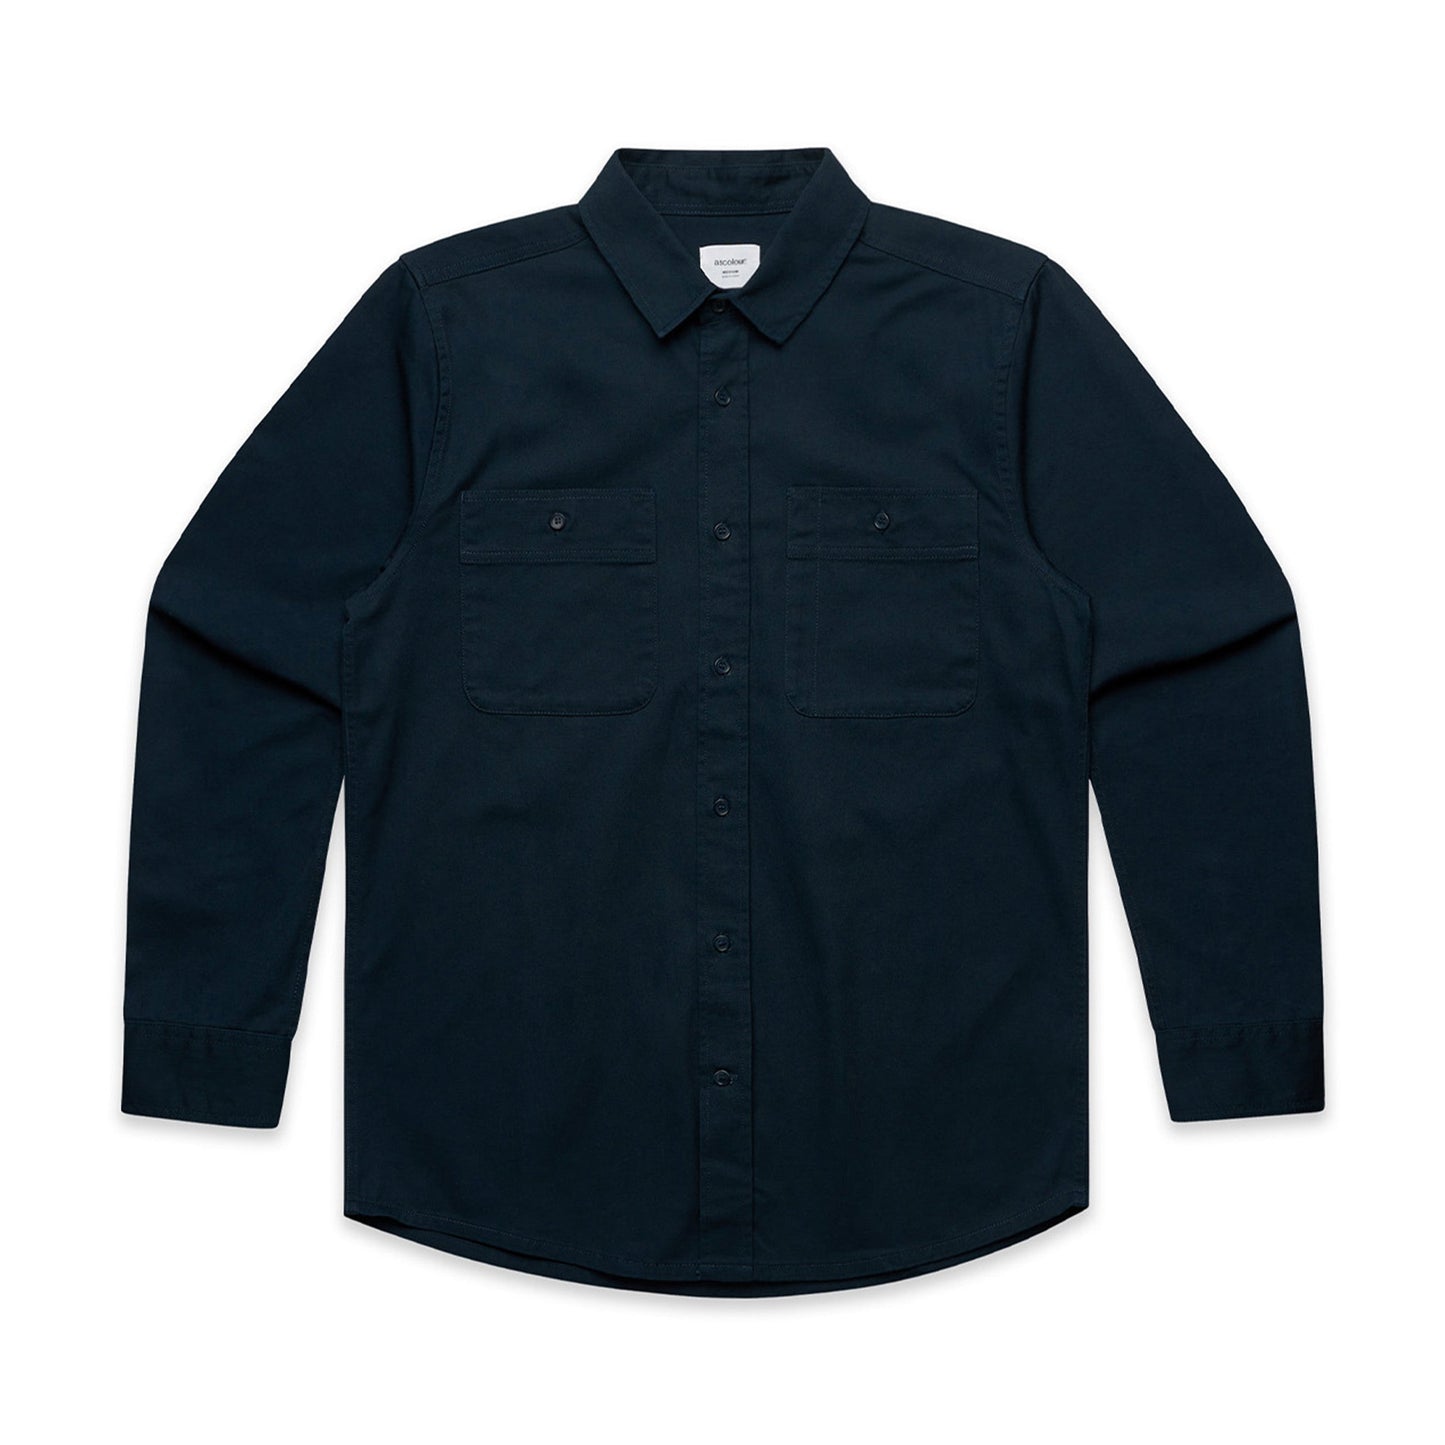 Mens Long Sleeve Work Shirt | COLD COFFEE LABEL